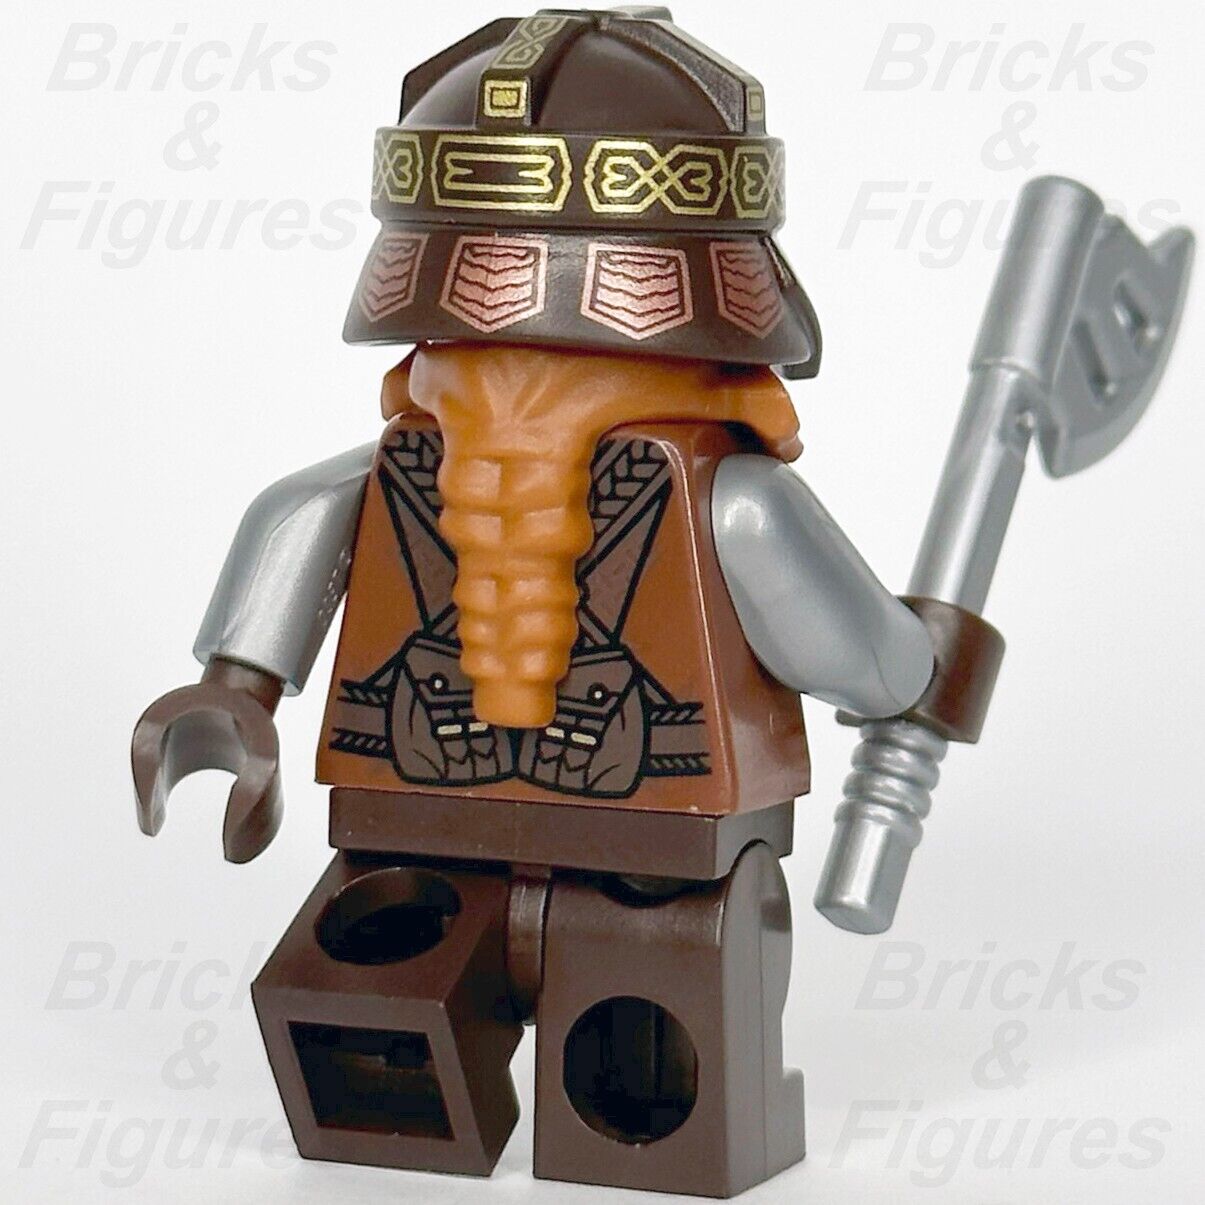 LEGO Gimli Minifigure The Hobbit & The Lord of the Rings Dwarf 10316 lor119 New - Bricks & Figures